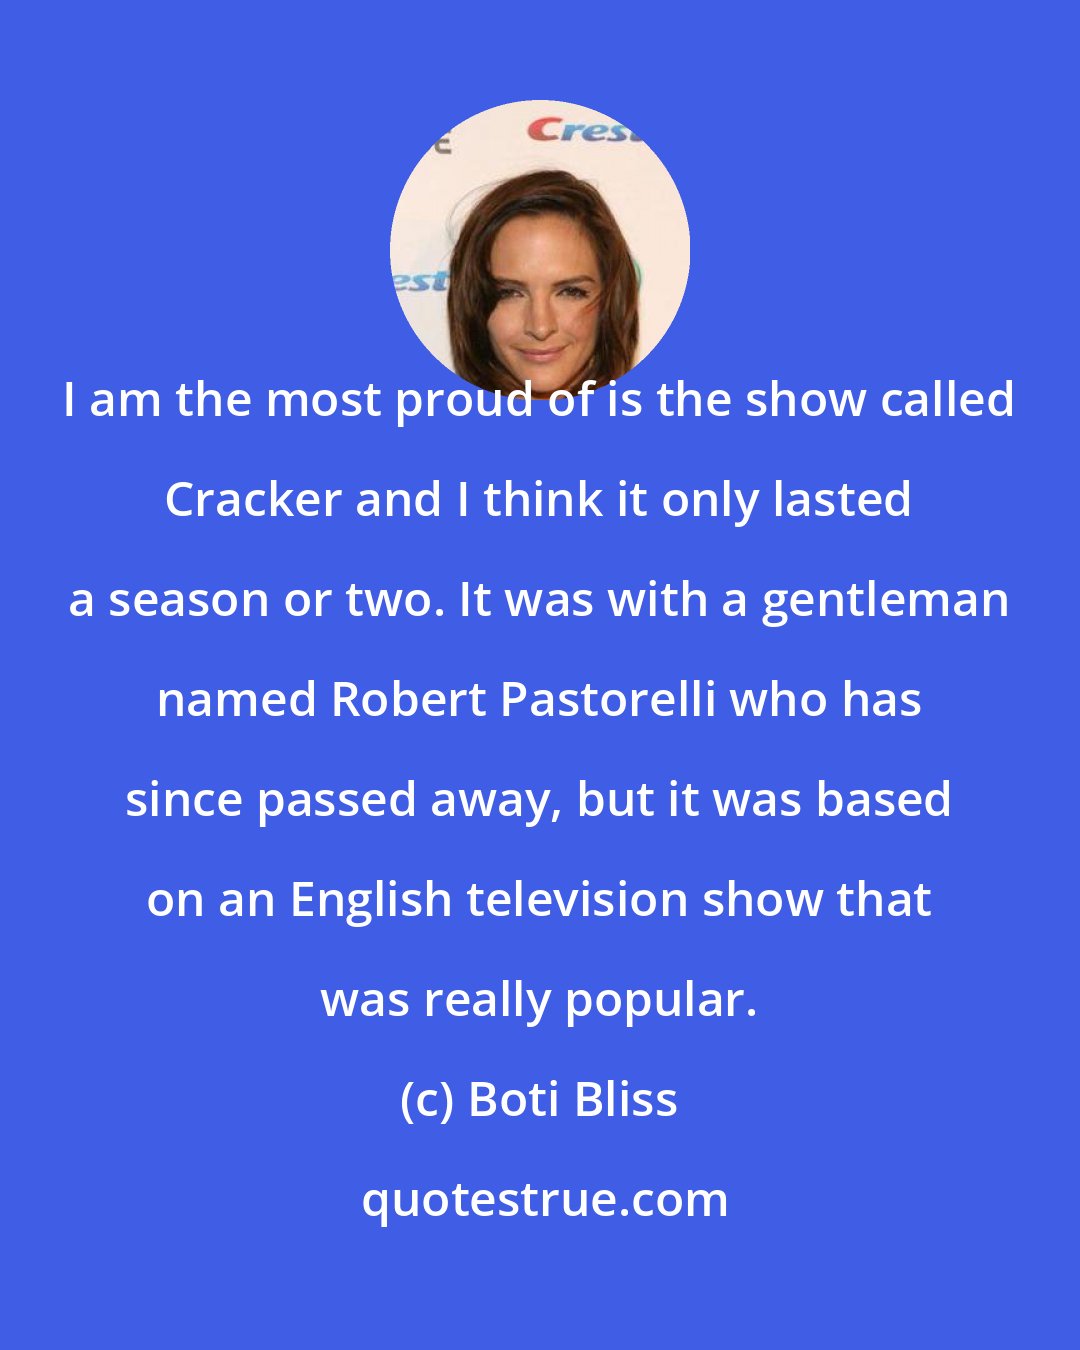 Boti Bliss: I am the most proud of is the show called Cracker and I think it only lasted a season or two. It was with a gentleman named Robert Pastorelli who has since passed away, but it was based on an English television show that was really popular.